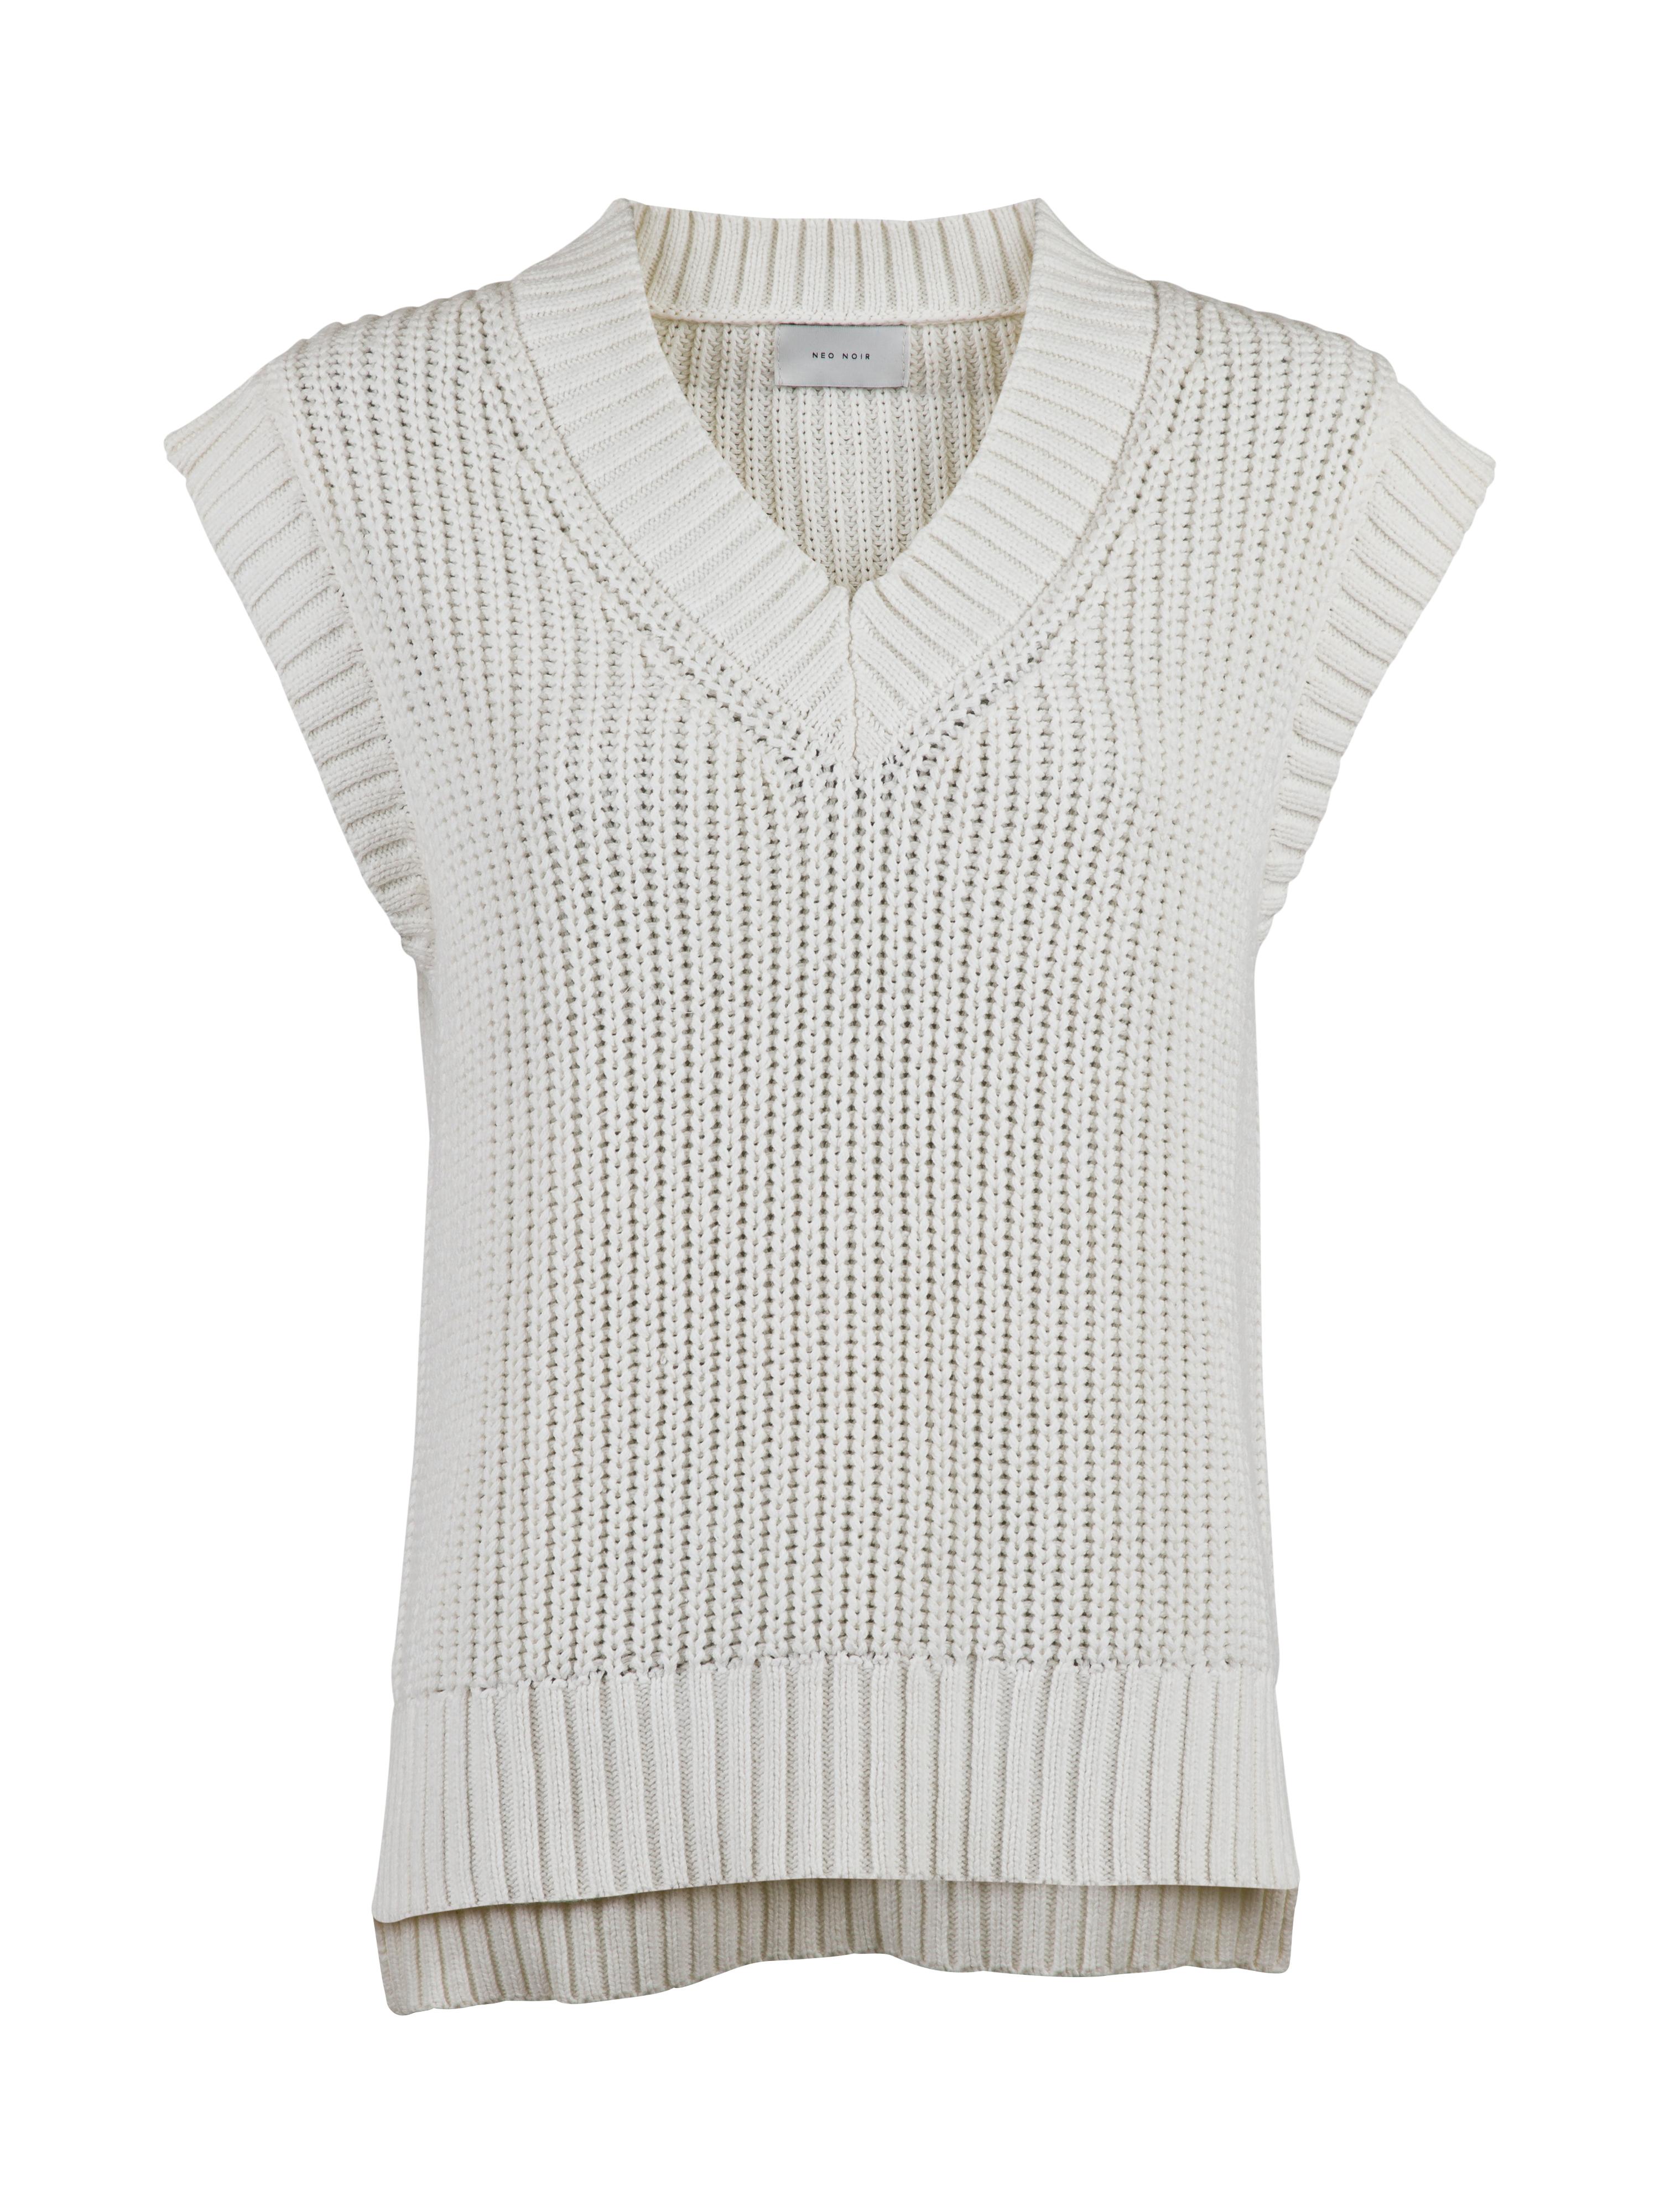 Kaylee Spring Knit Waistcoat - Off White